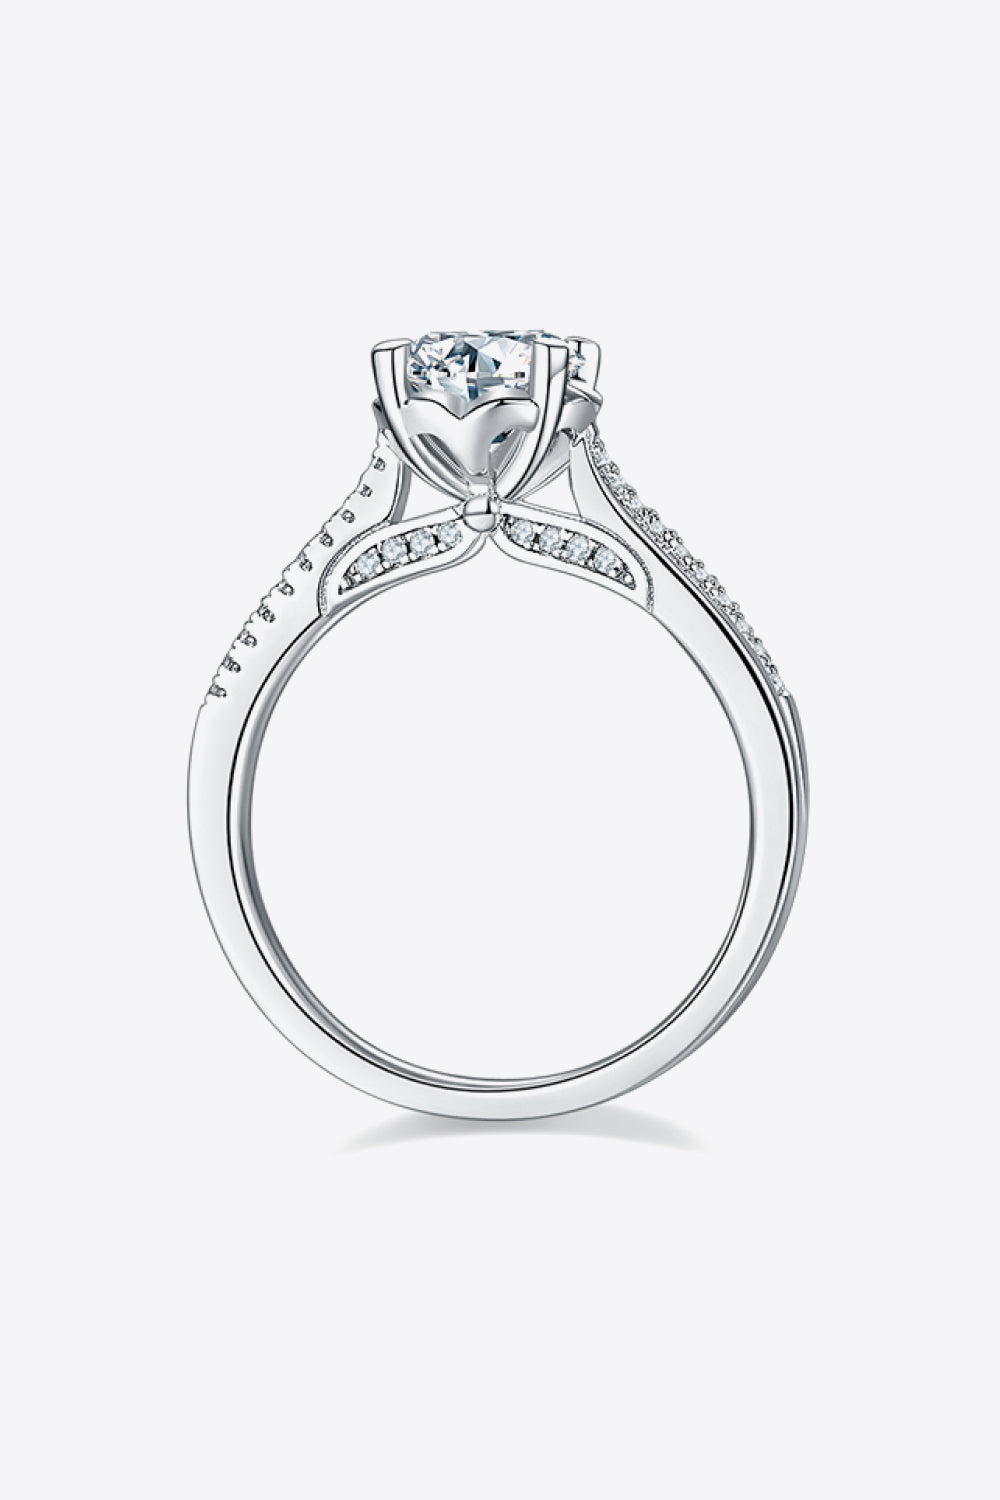 Adored 1 Carat Moissanite 925 Sterling Silver Ring